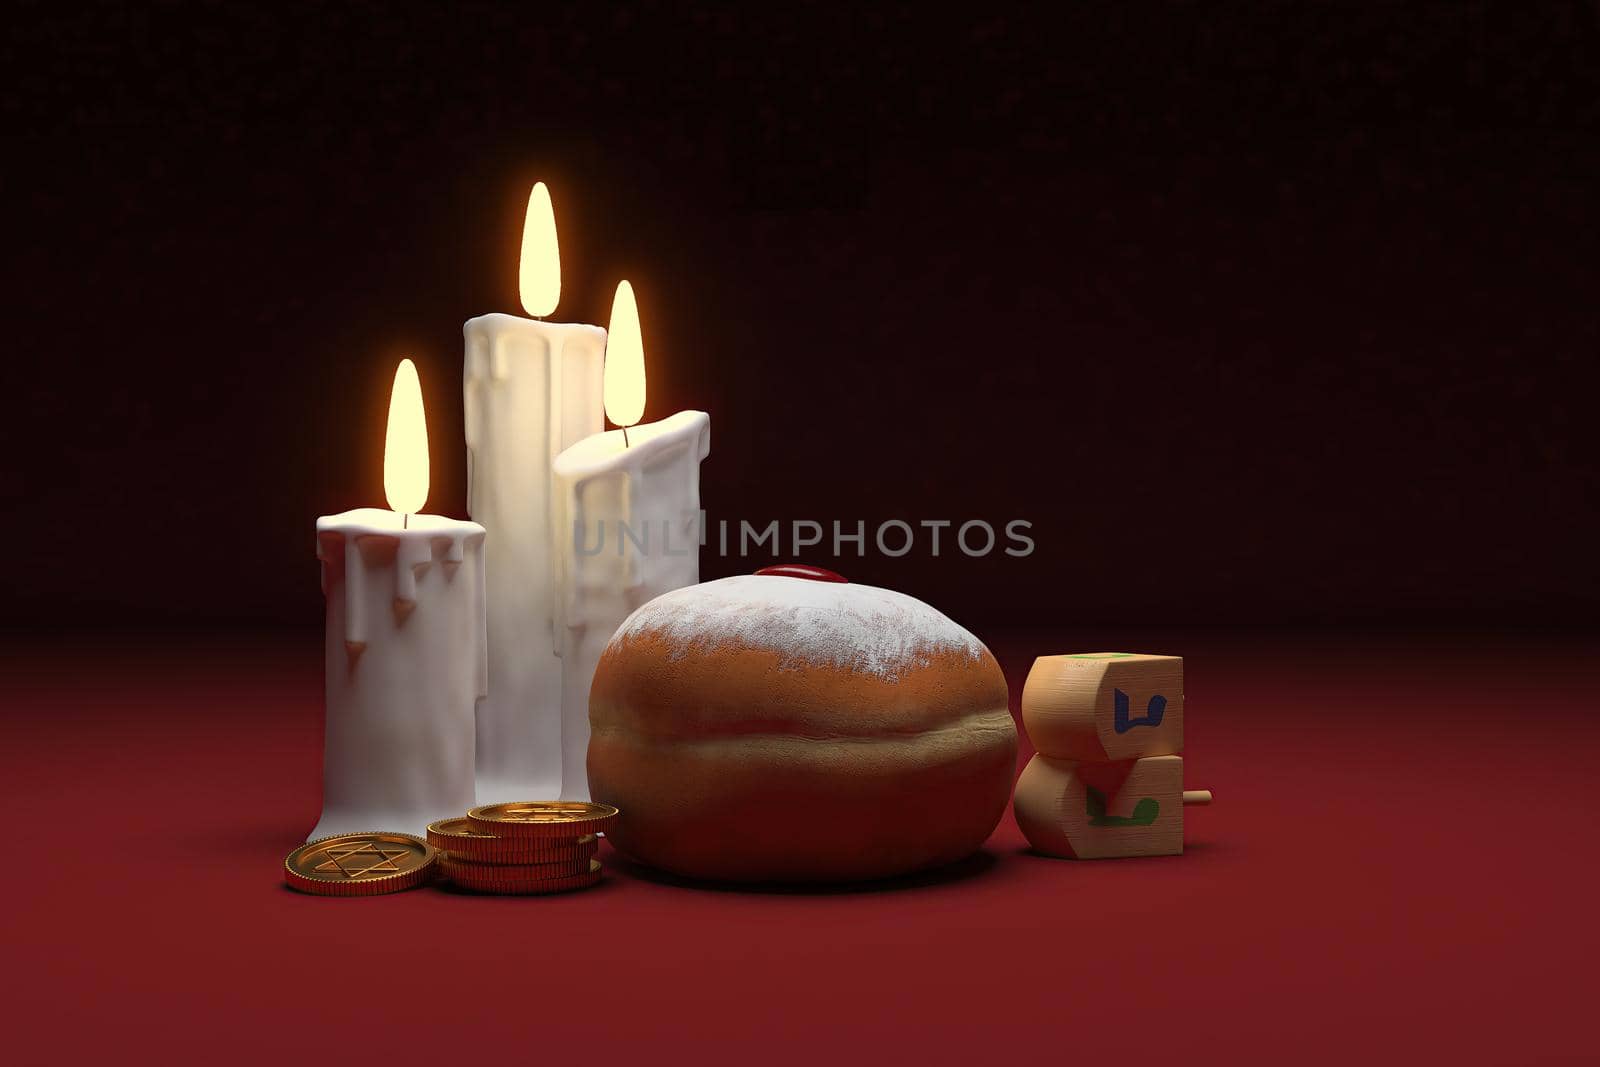 3d rendering Image of Jewish holiday Hanukkah with lighted candles, gold coin and wooden dreidels or spinning top on a  red flor and black background.